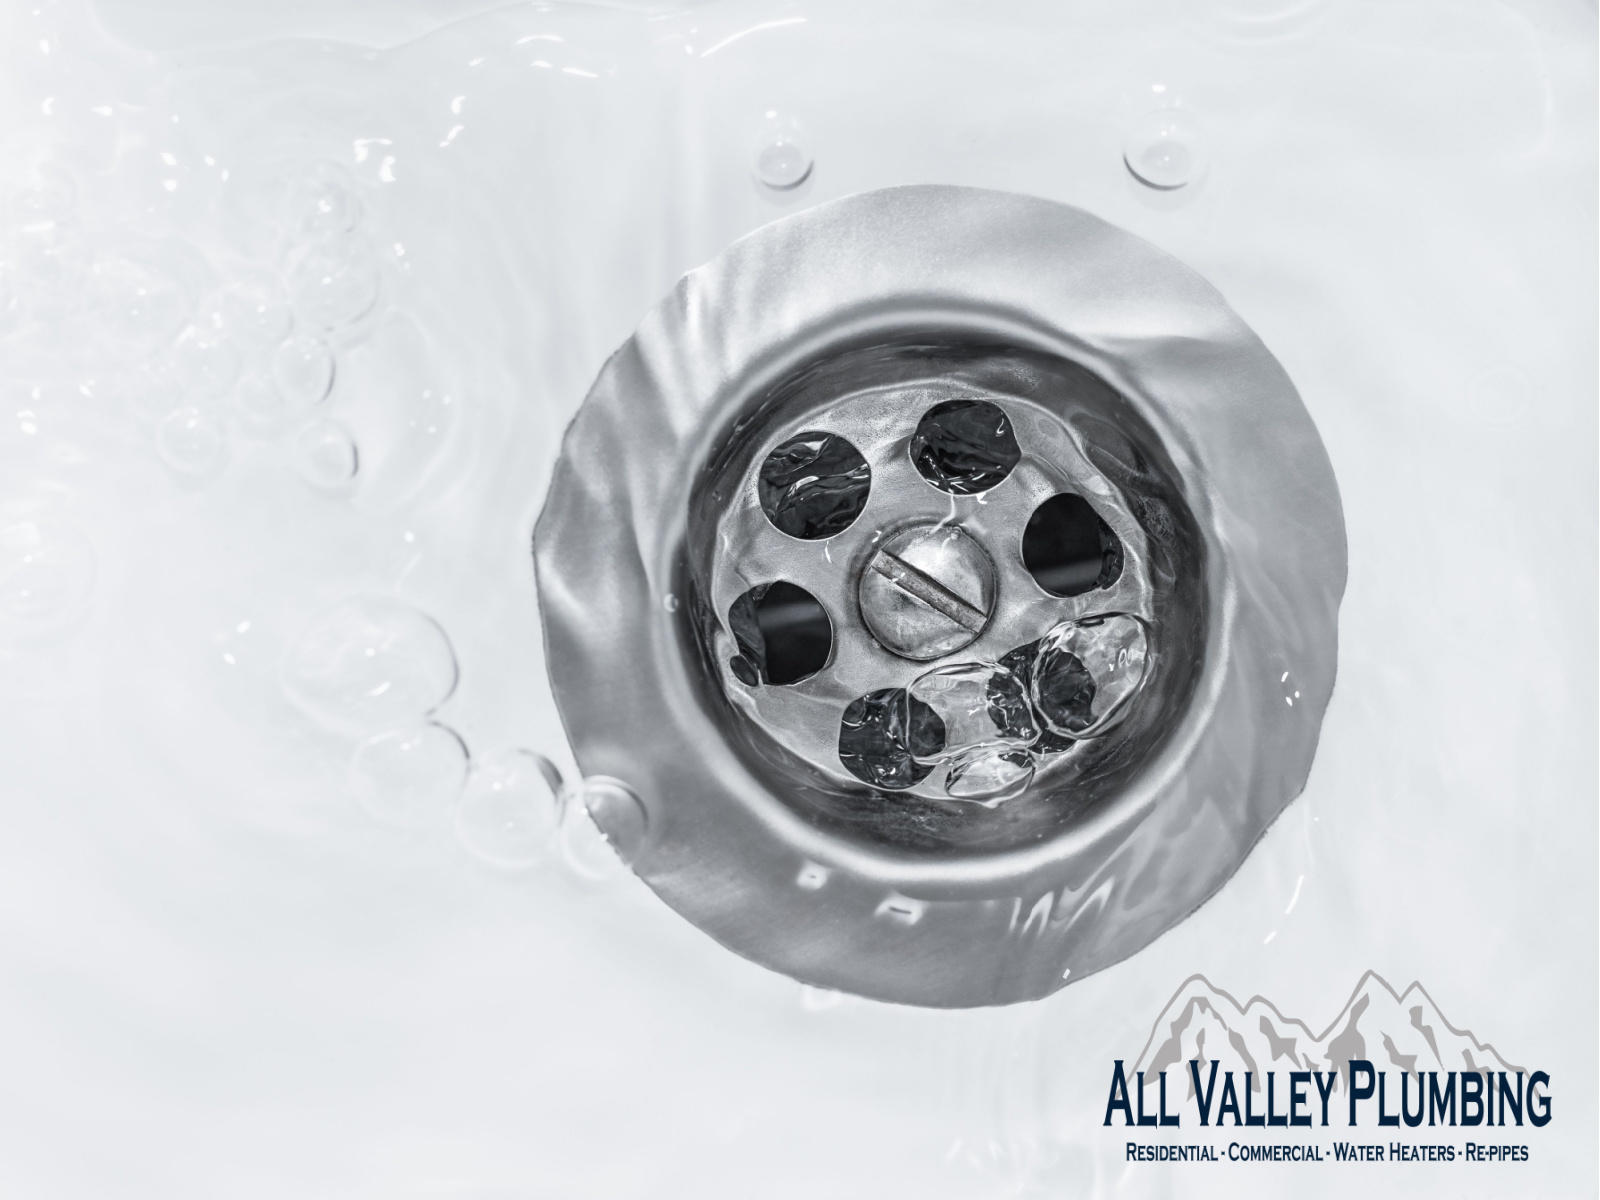 Treat Your Snohomish Plumbing to Expert Drain Cleaning Services